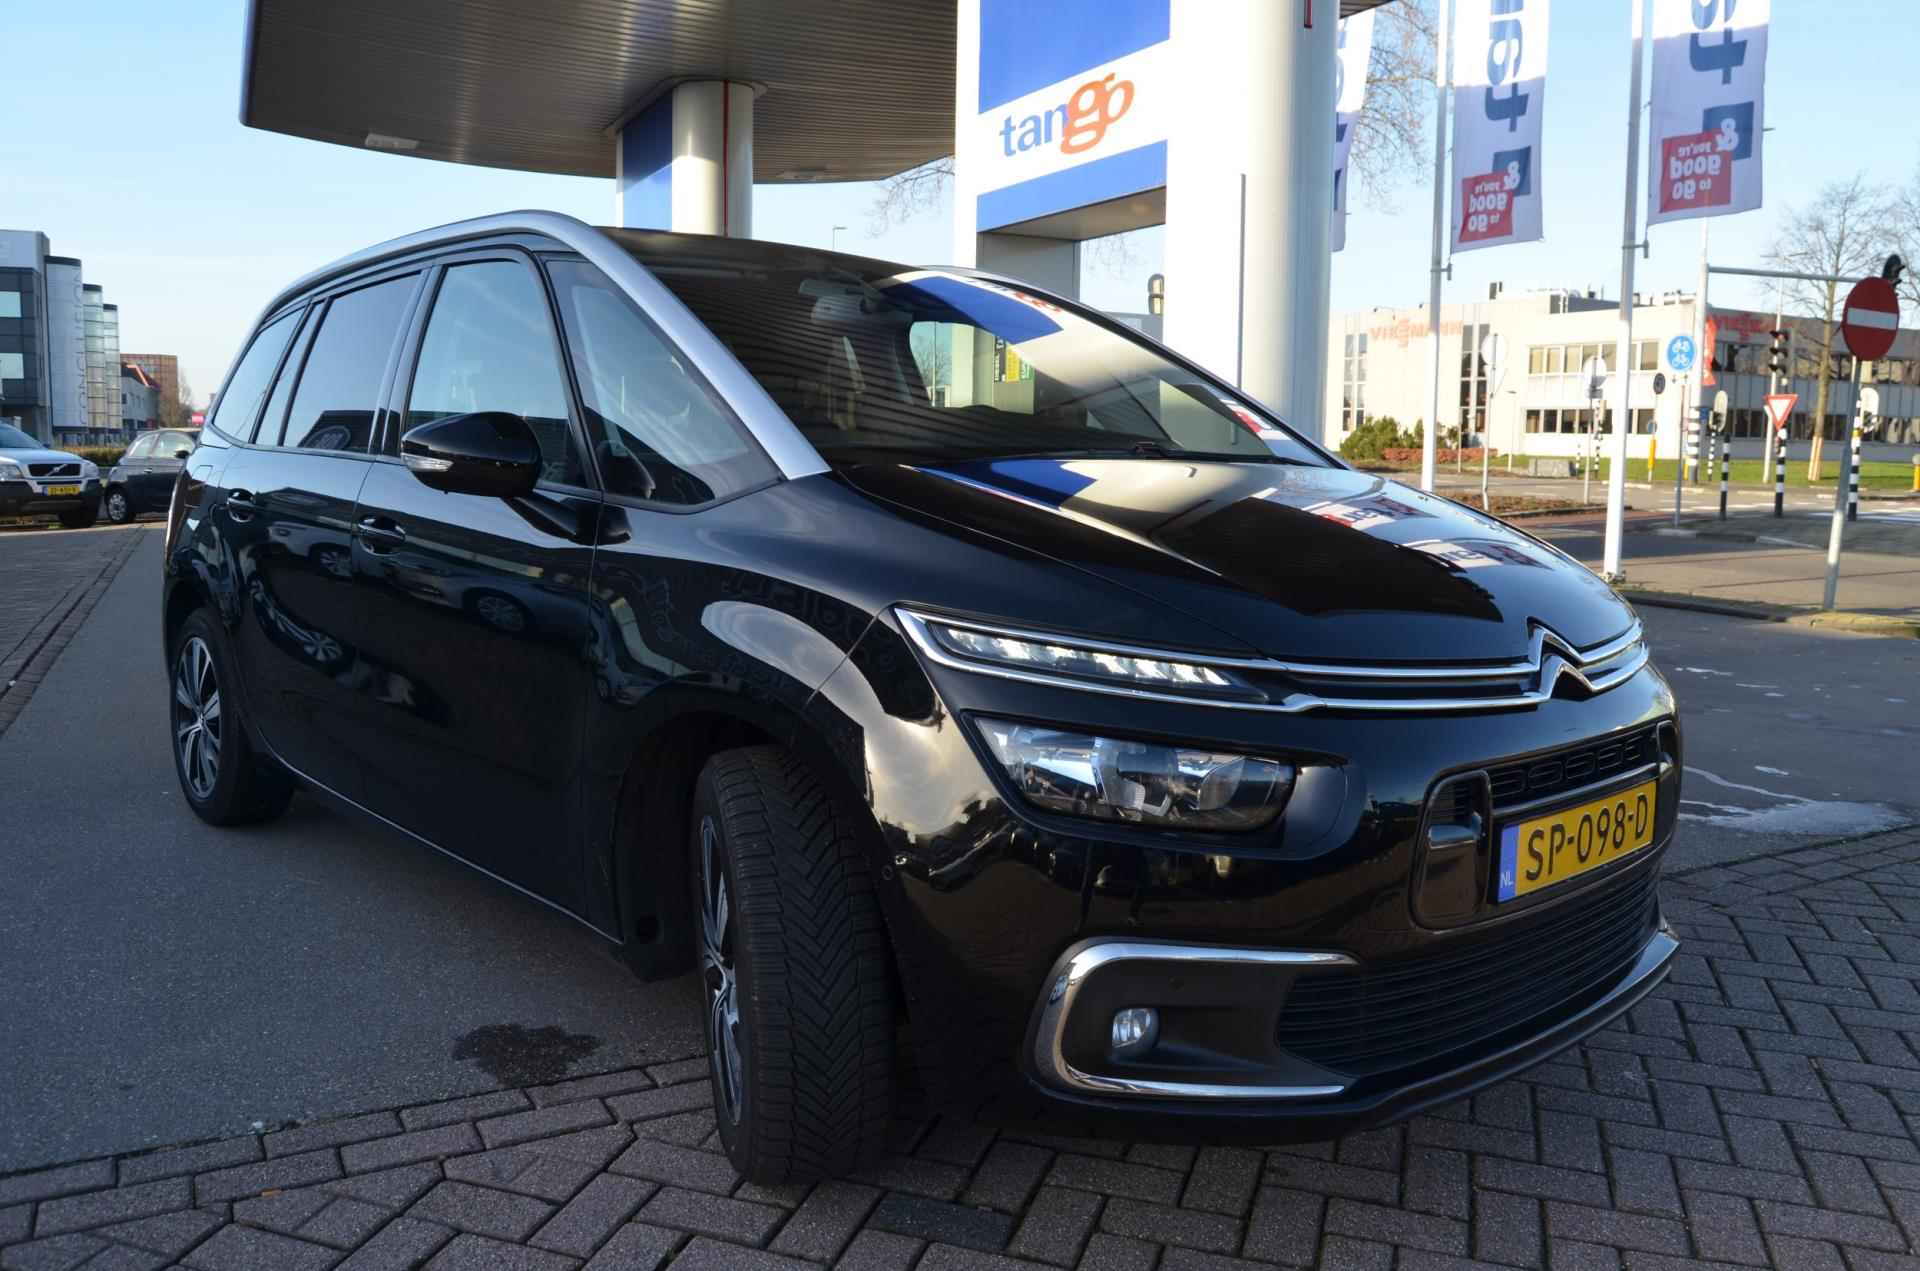 Citroen Grand C4 Picasso 1.2 7 PERS|7 PERSOONS|2E PAASDAG OPEN. - 12/30